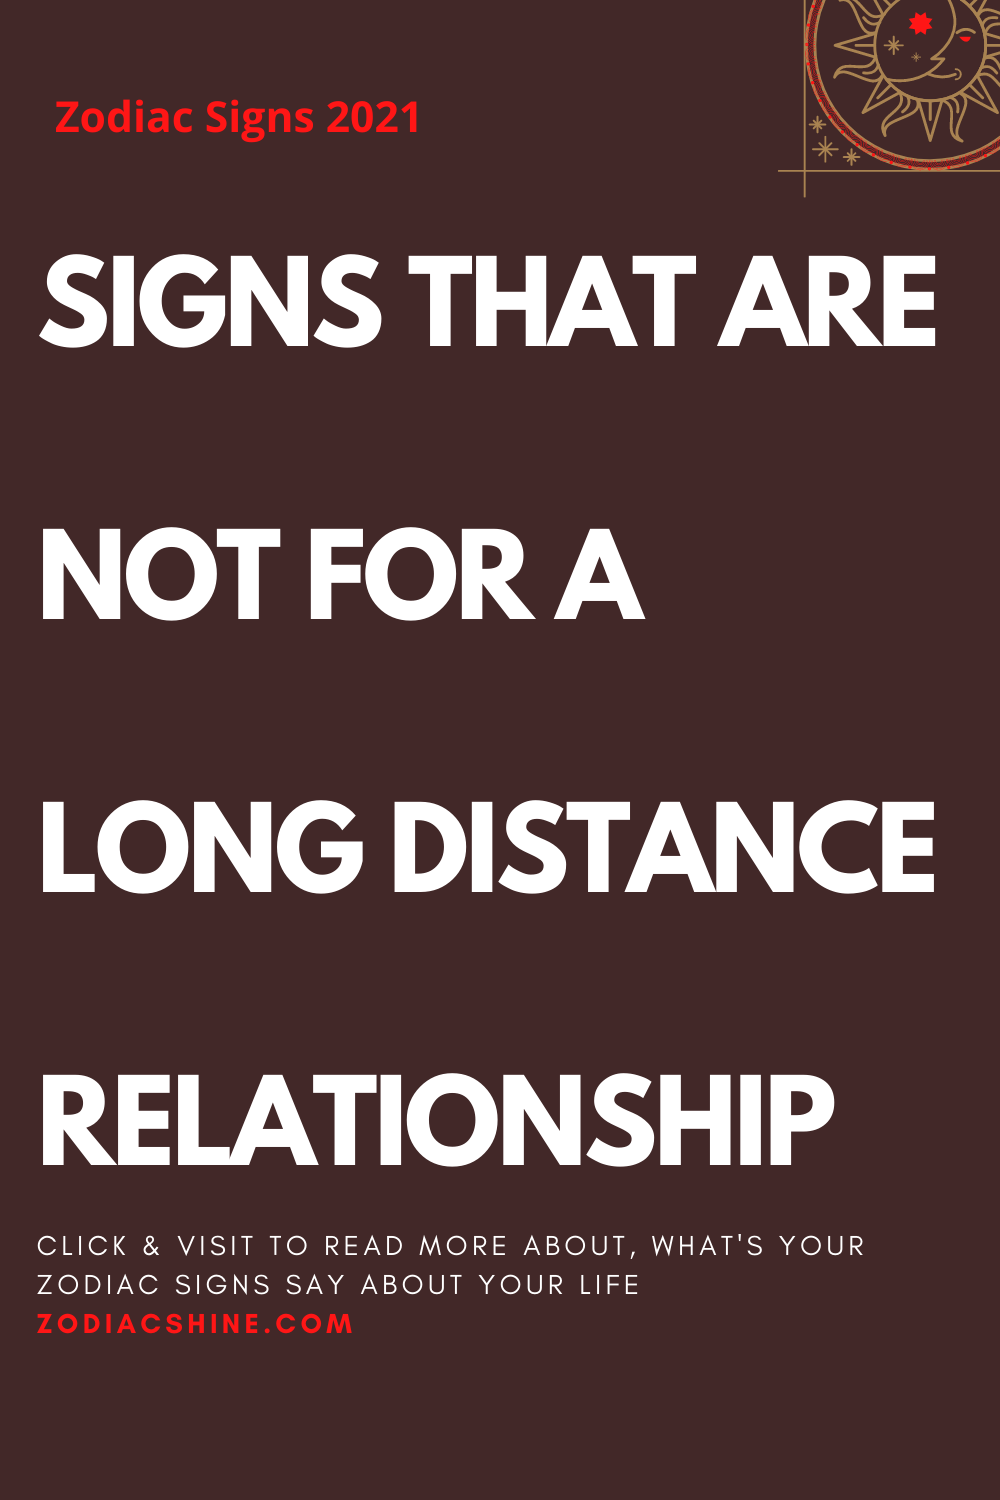 SIGNS THAT ARE NOT FOR A LONG DISTANCE RELATIONSHIP